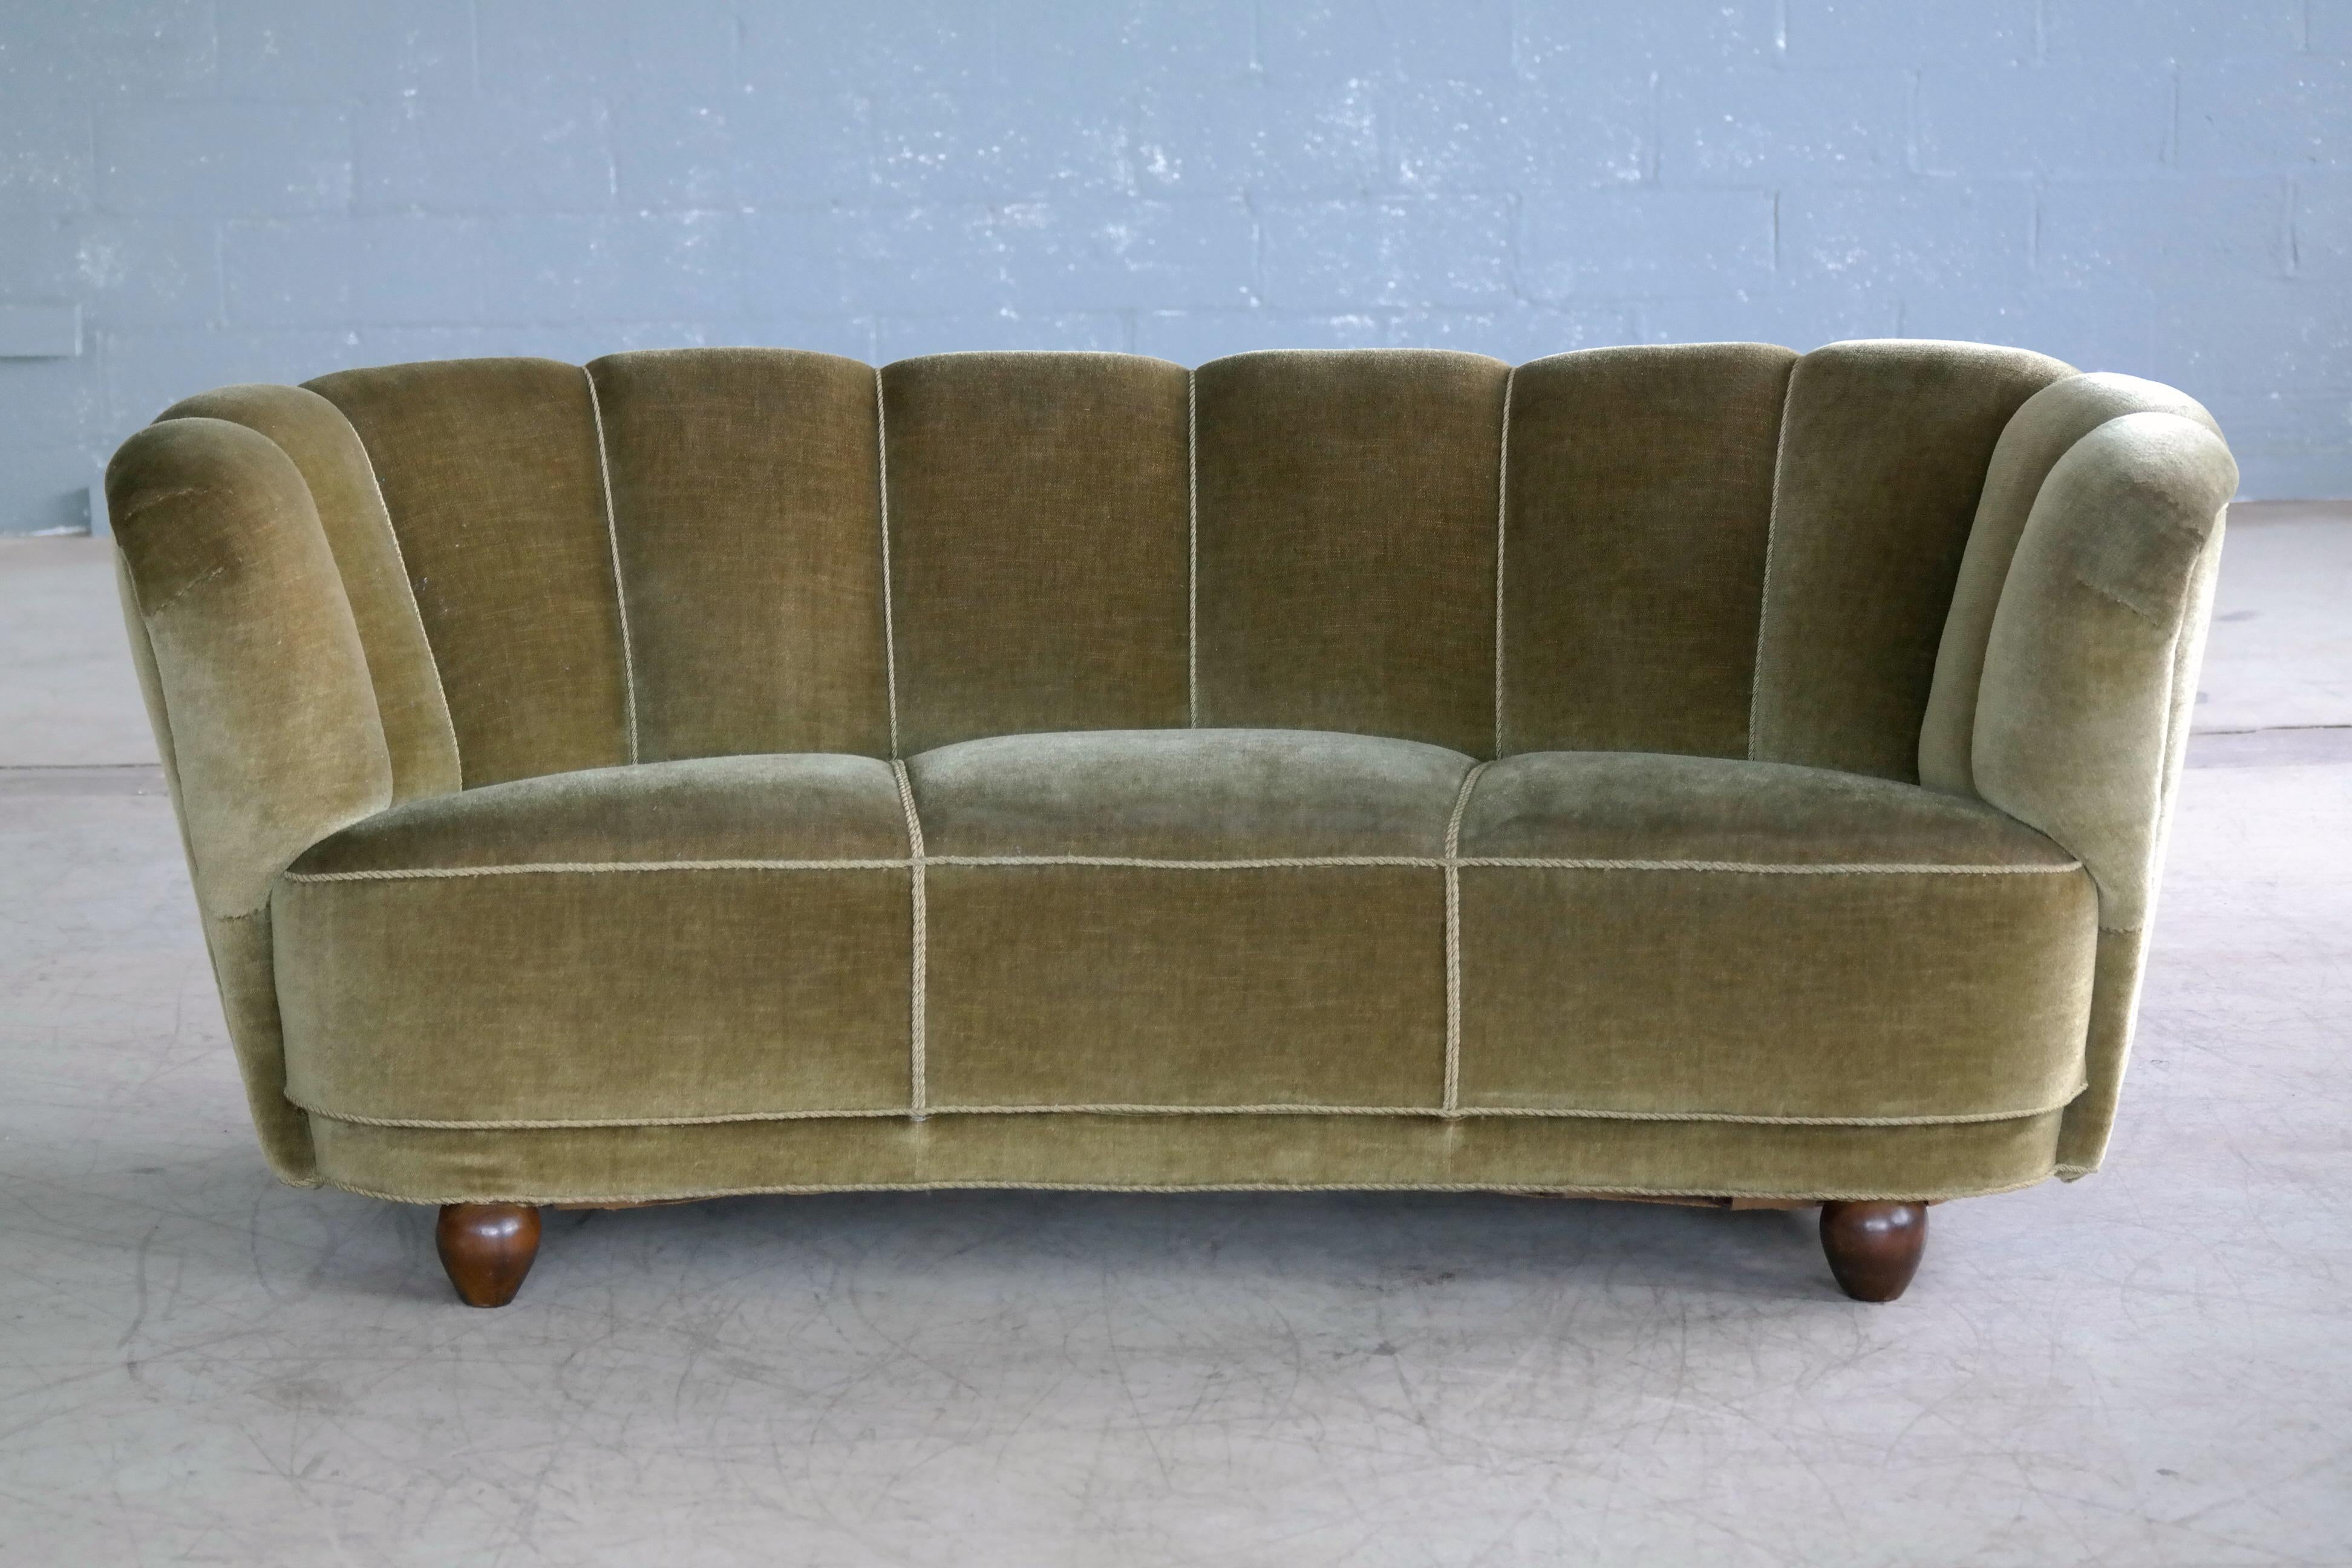 1940s Danish curved sofa often referred to by the Danes as banana form sofa. This sofa has a really nice elegant lines and we love the combination of the mohair fabric with the channels in the back. The sofa was re-upholstered at a later point and